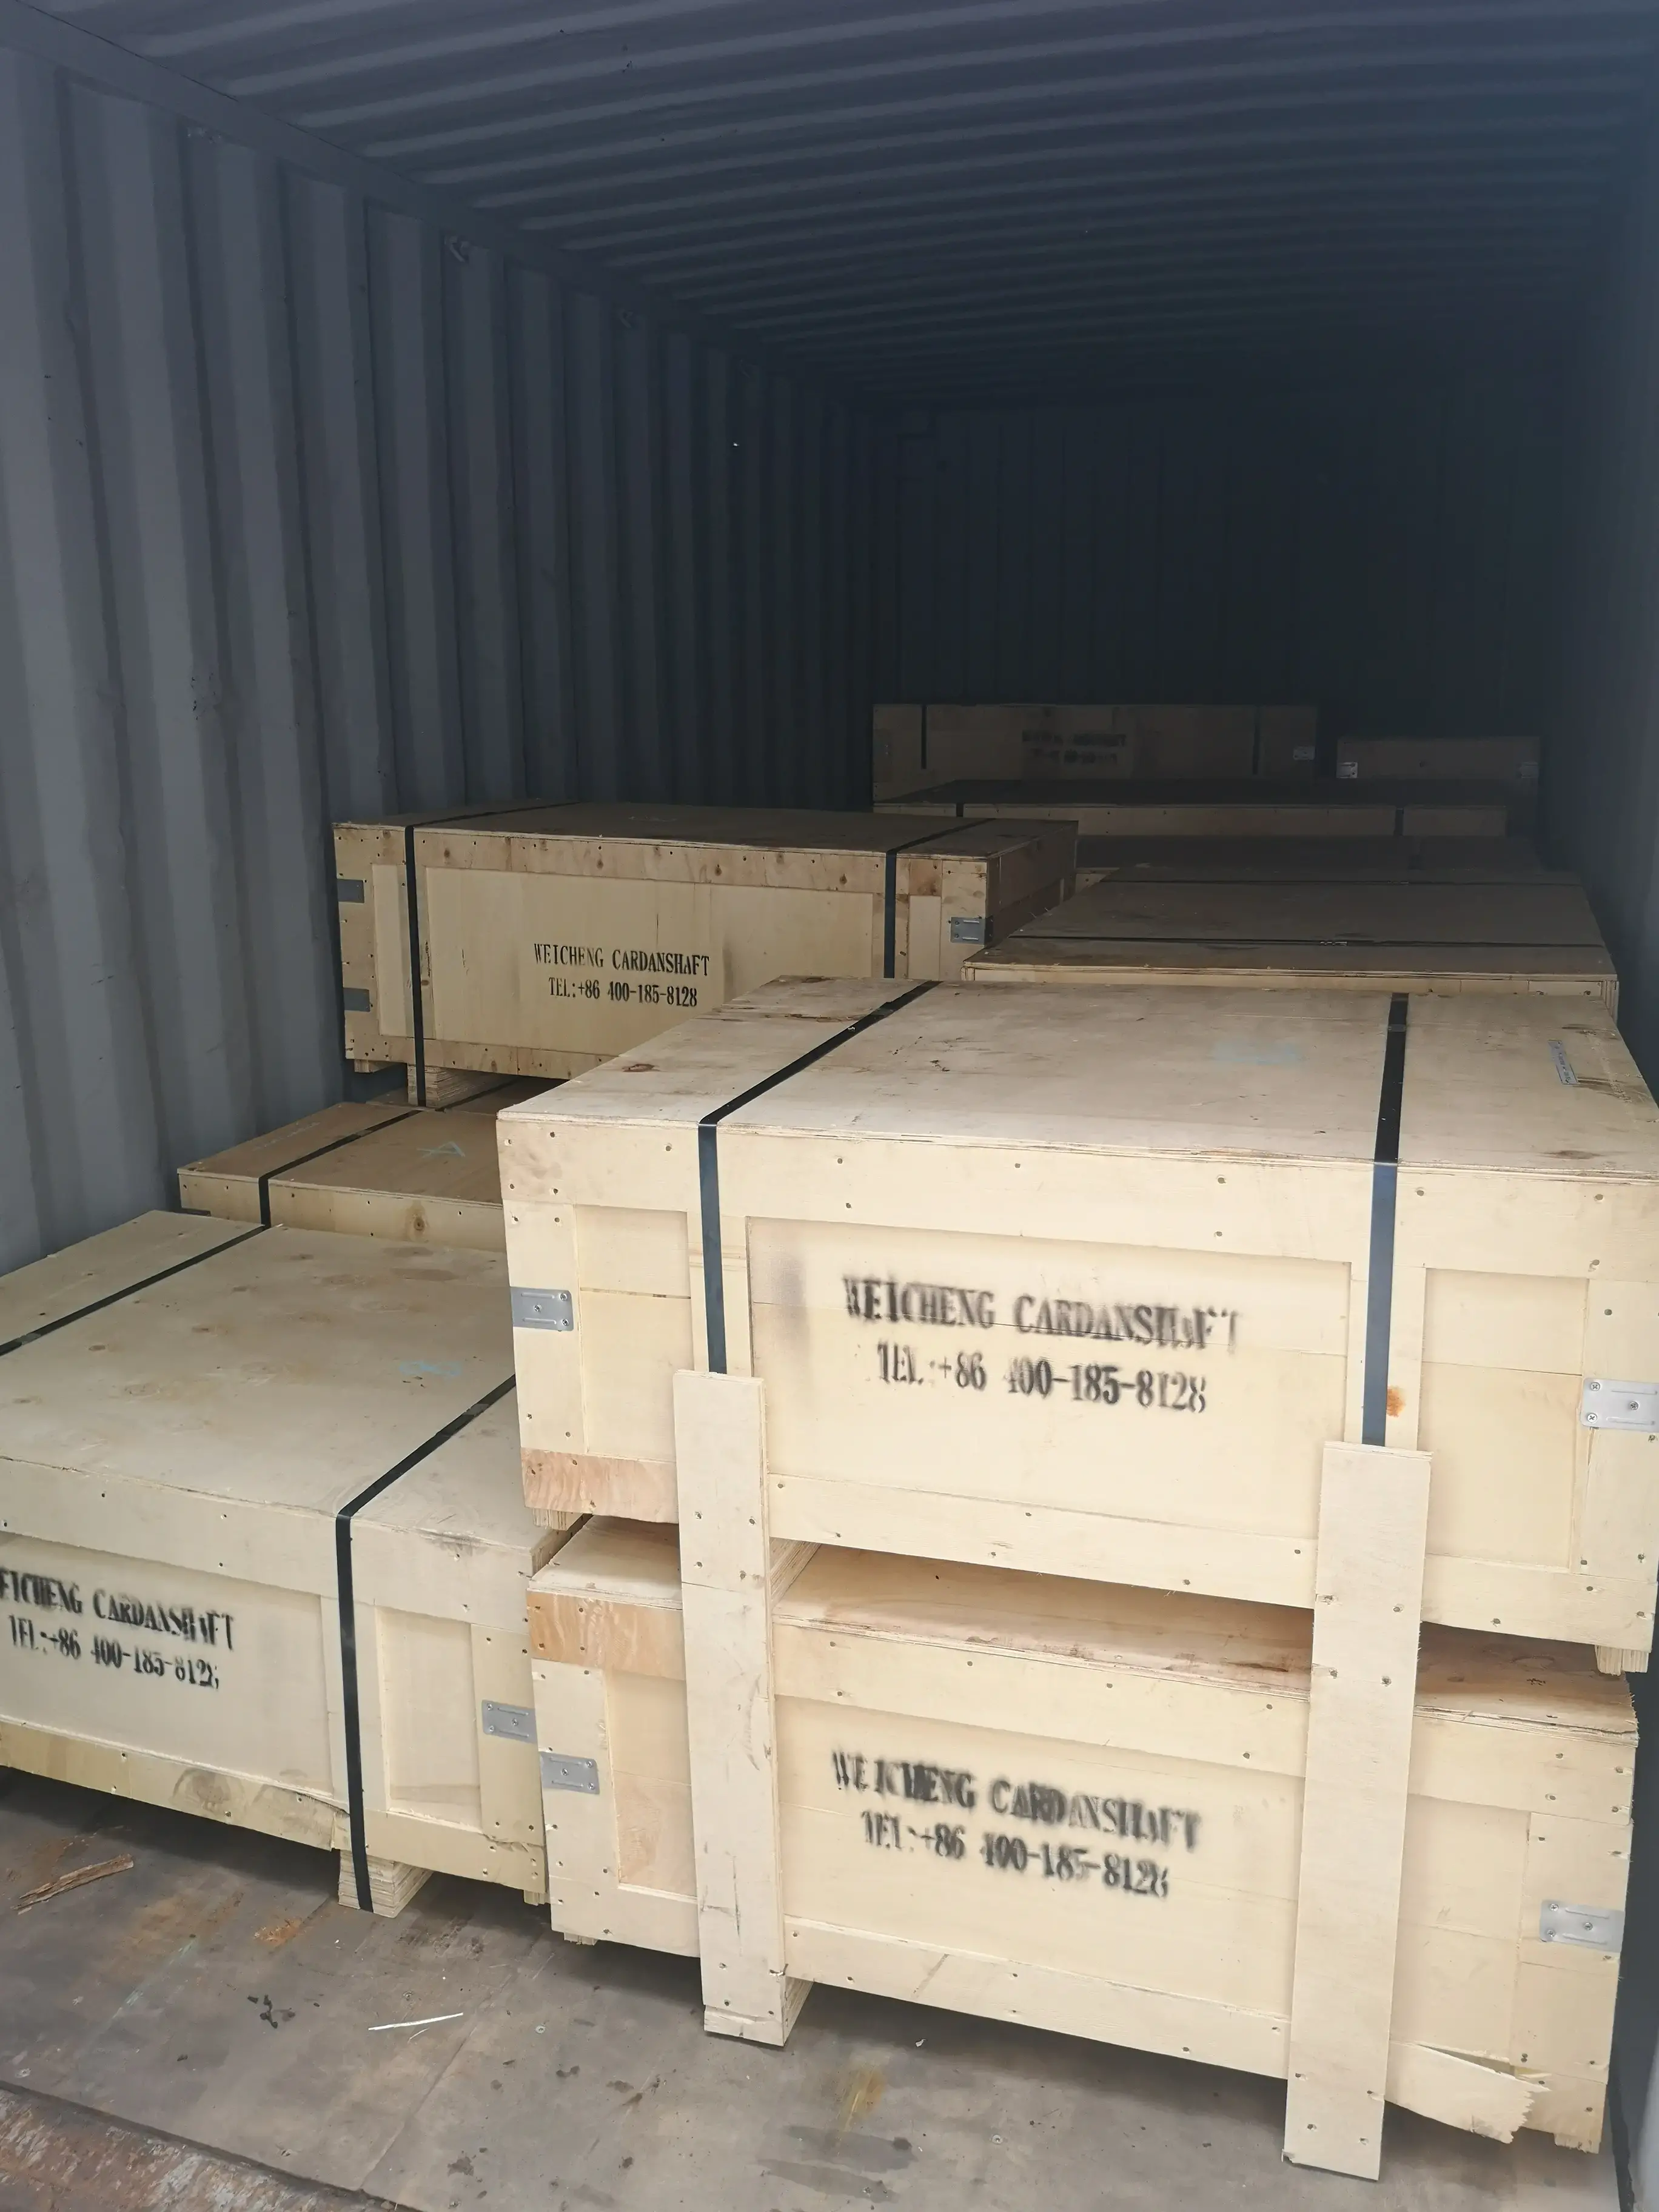 we are continuing to deliver our cardan shafts worldwide with strict quality